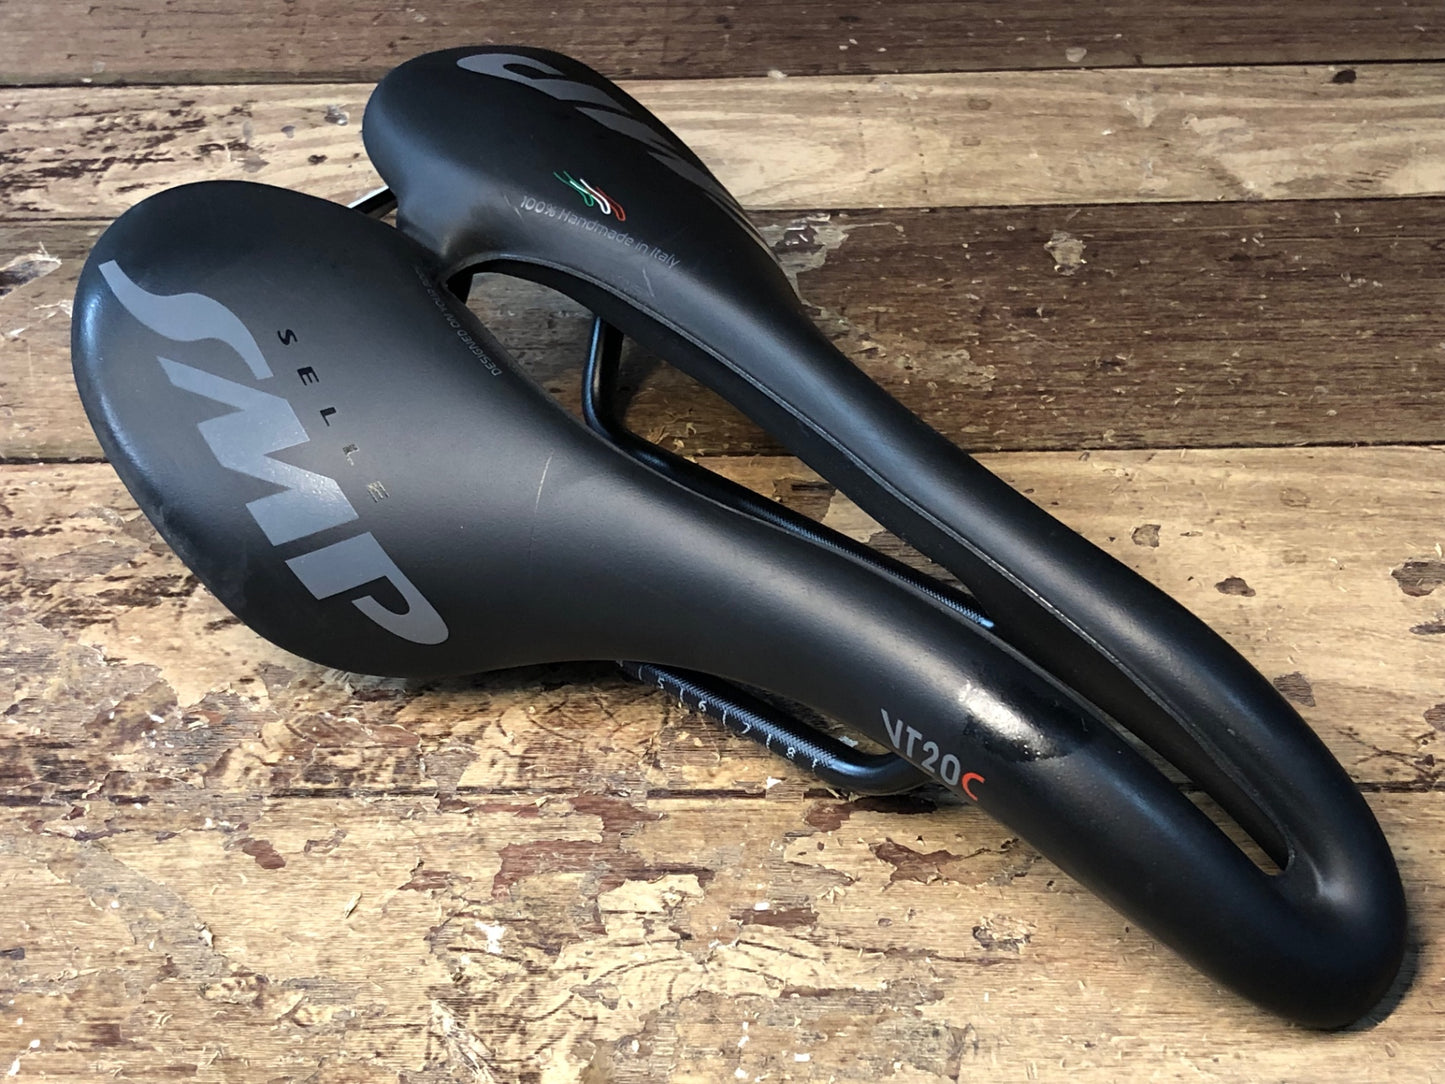 HY190 SELLE SMP VT20C サドル 黒 144mm aisi 304 tube